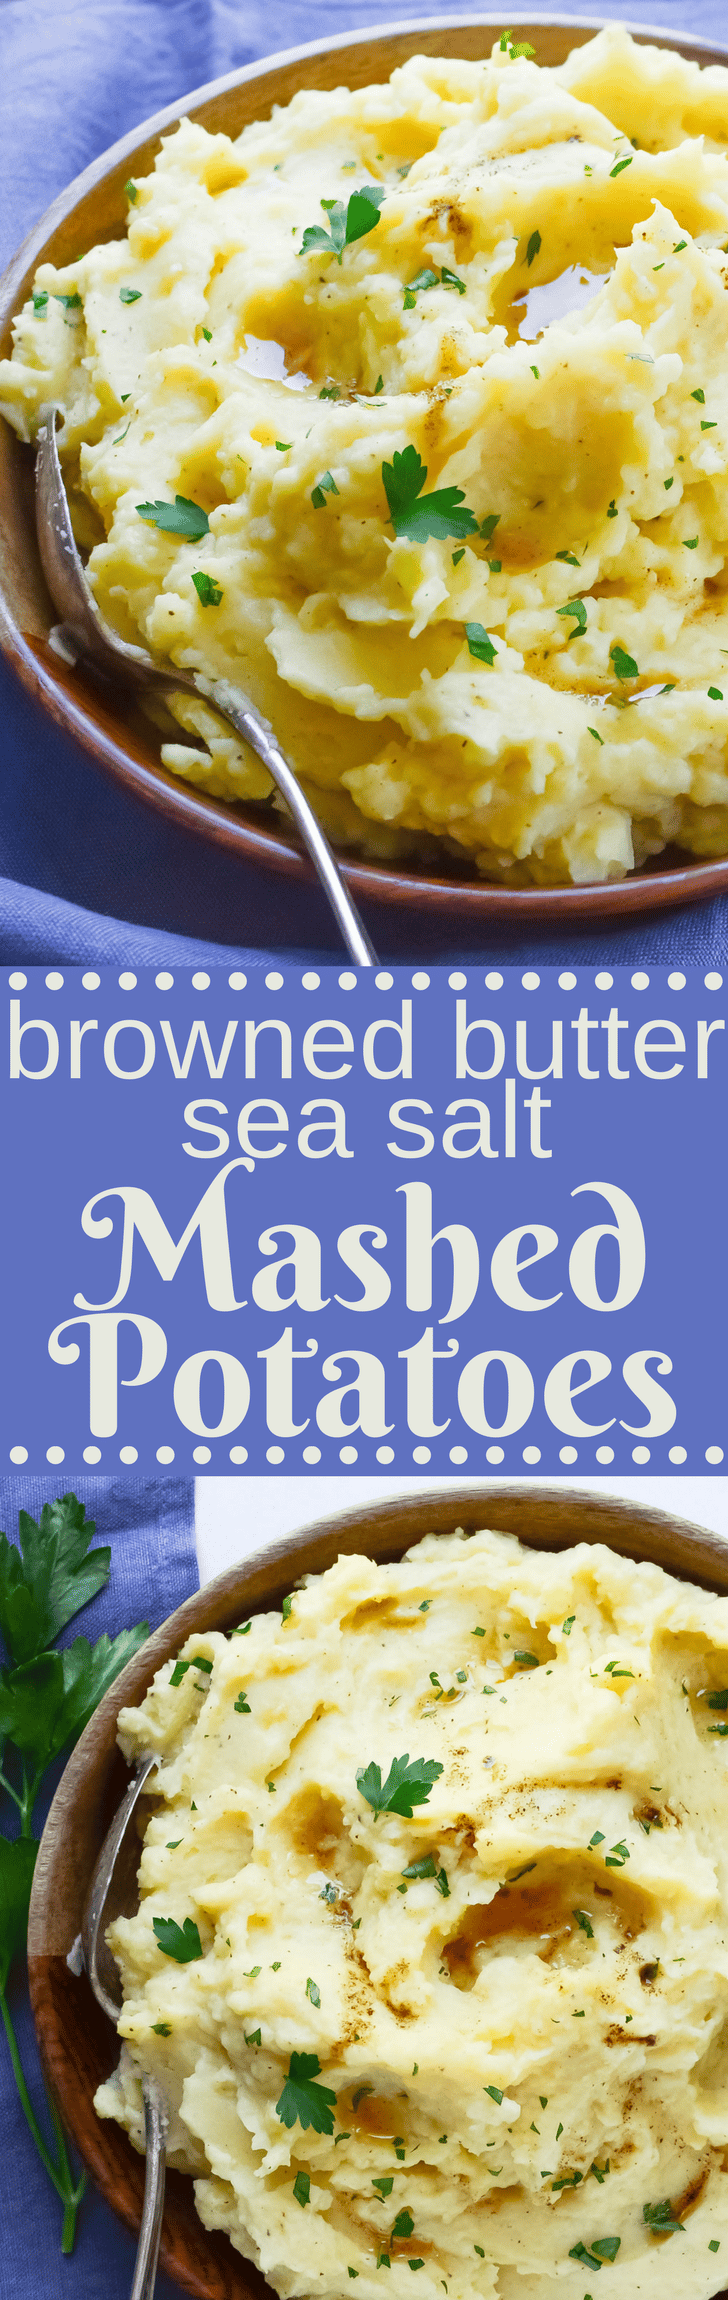 Looking for the ultimate mashed potato recipe? It's here. Browned Butter Sea Salt Mashed Potatoes are rich & creamy. Plus, get the tool for perfect spuds.